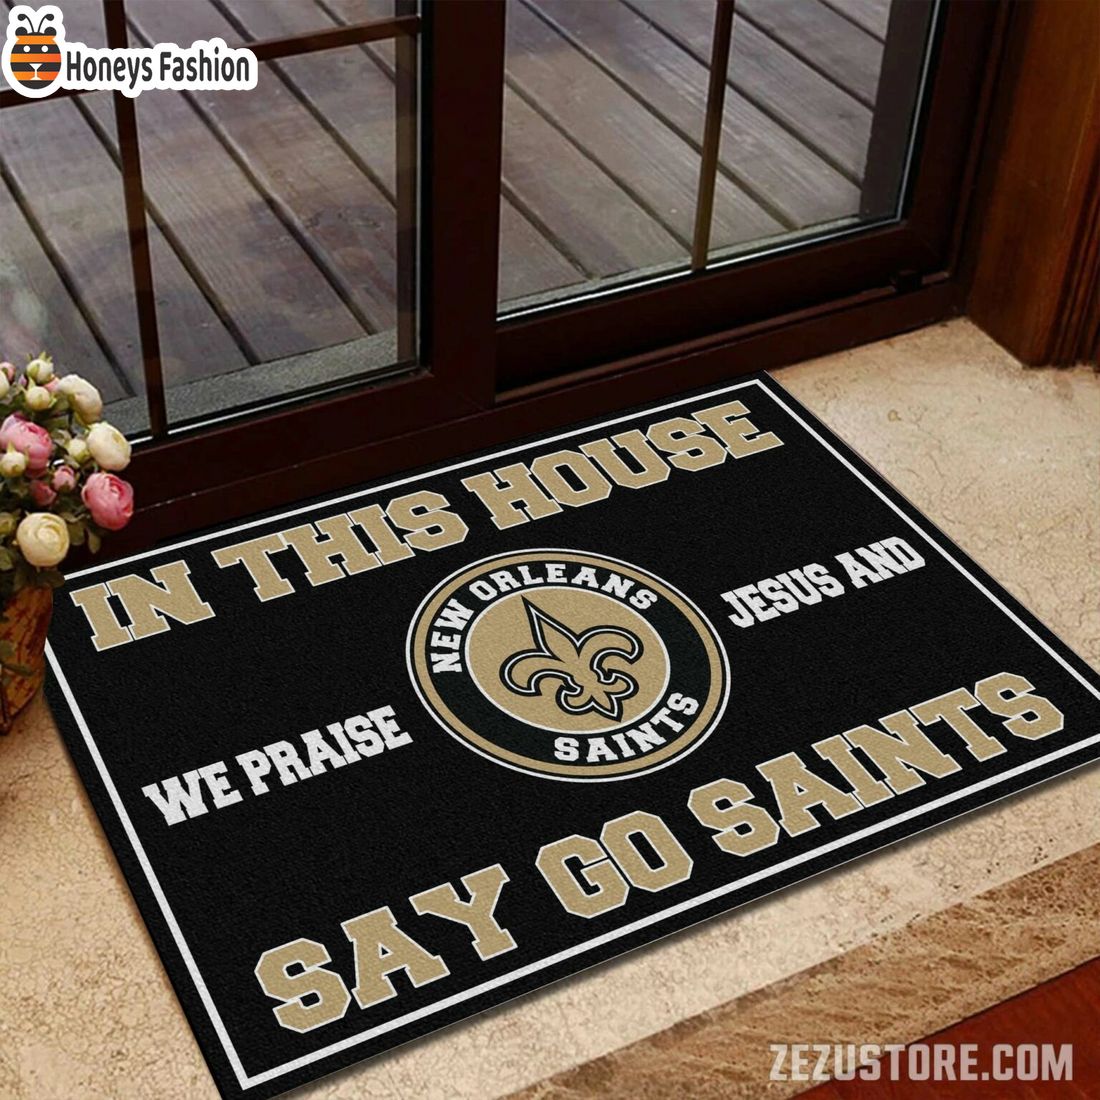 In this house we praise jesus and say go Saints doormat